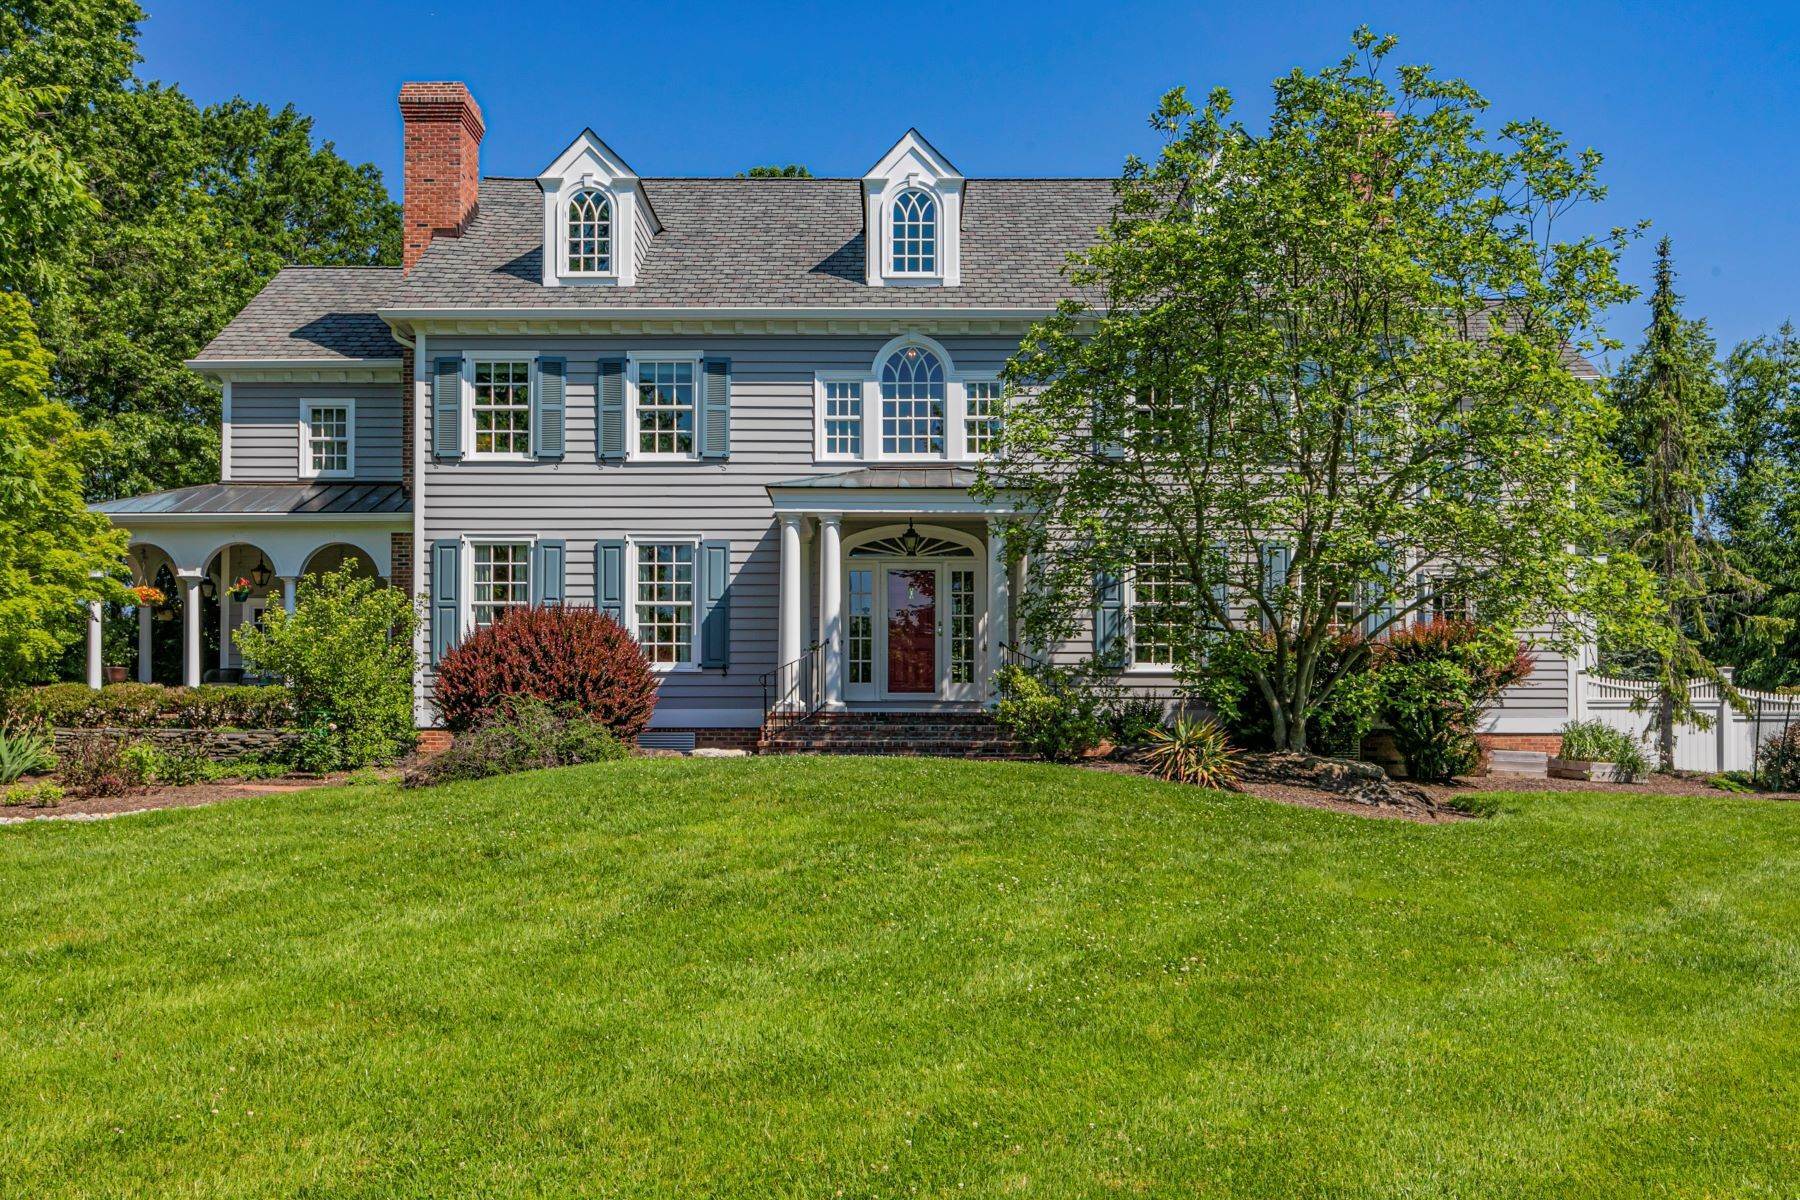 Single Family Homes for Sale at A Fabulous Estate Property On The Edge Of Pennington 5 Woodmere Way Pennington, New Jersey 08534 United States